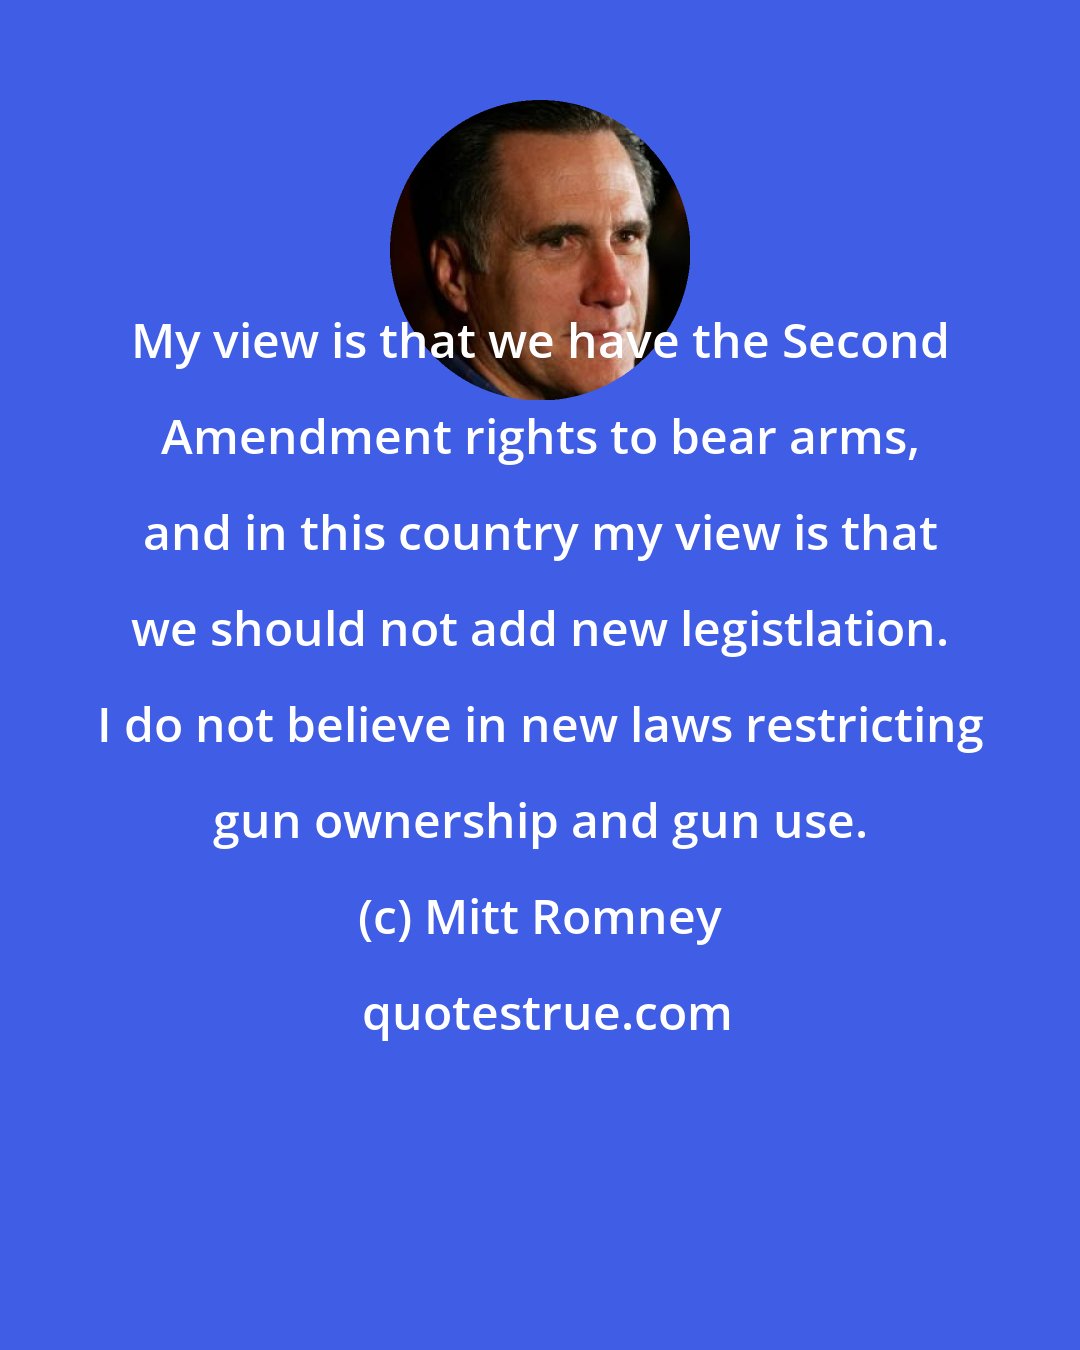 Mitt Romney: My view is that we have the Second Amendment rights to bear arms, and in this country my view is that we should not add new legistlation. I do not believe in new laws restricting gun ownership and gun use.